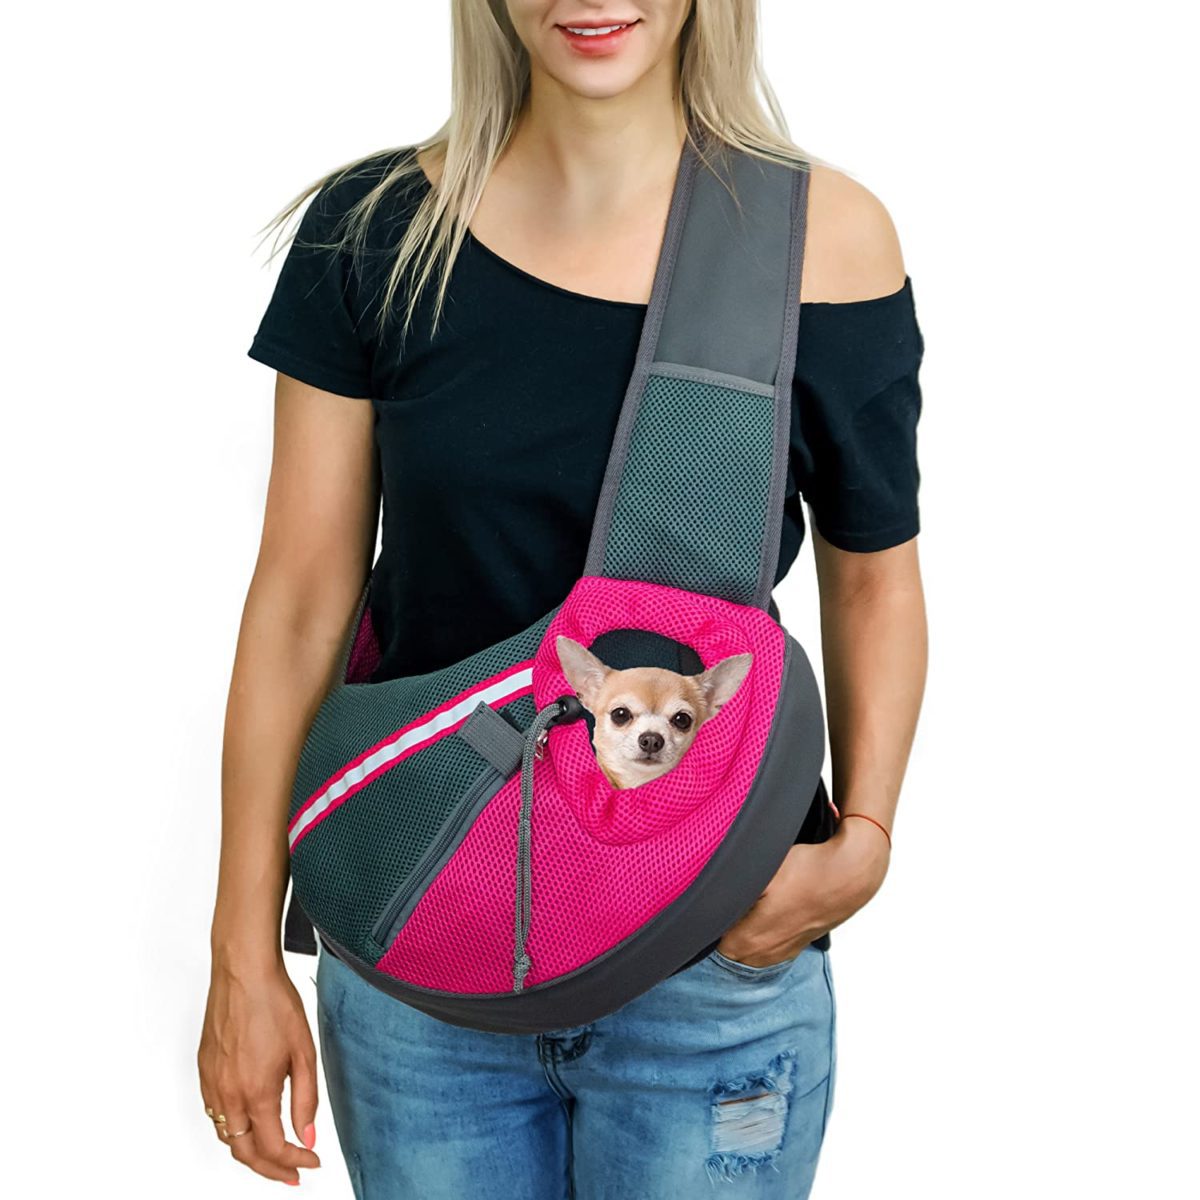 Travel Bag for Cats and Dogs with Reflective Strips The sling bag has a pet-friendly however sturdy mesh cloth which could be very straightforward to scrub and a sturdy development for straightforward carrying. We created this dog bag service with your pet’s security and happiness in thoughts. pet sling service is supplied with hook and loop pads to stop the zipper from being pulled down, a plug hook for further maintain, heavy-duty zippers, and a reflective strip, to make sure most security for you and your pet always.